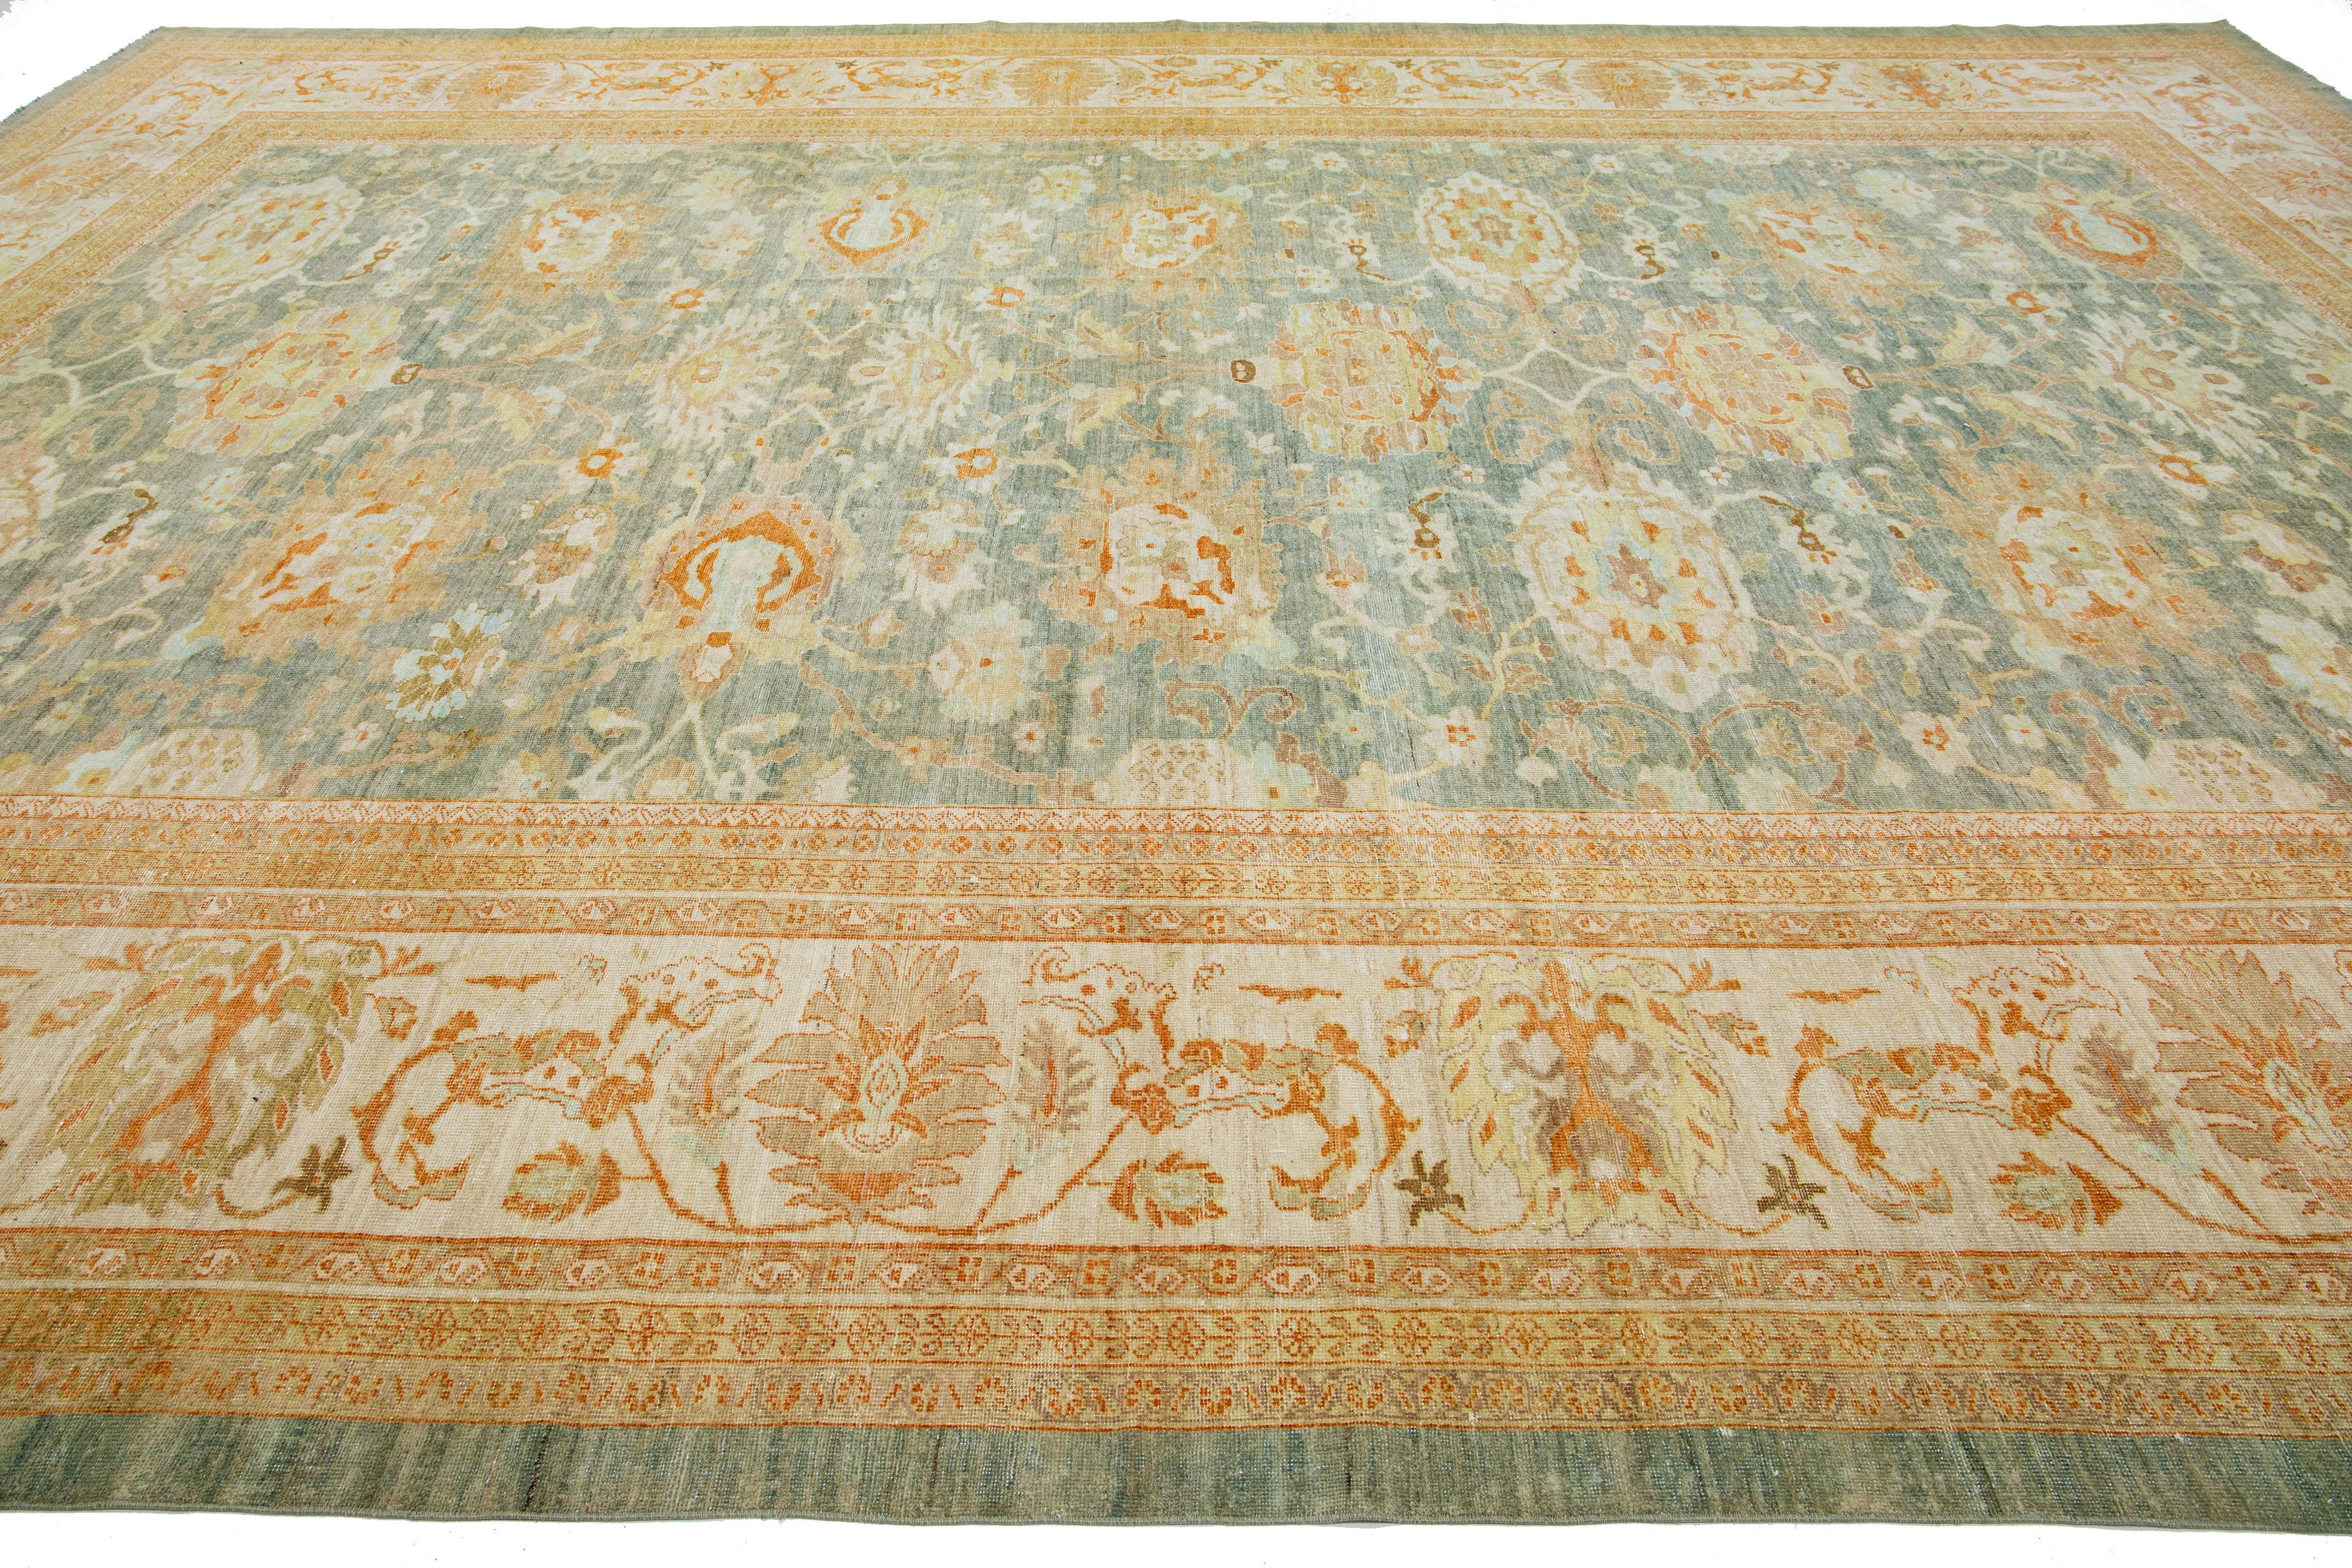 Hand-Knotted Light Blue Persian Wool Rug Vinatge  from the 1940's with a Floral Design For Sale